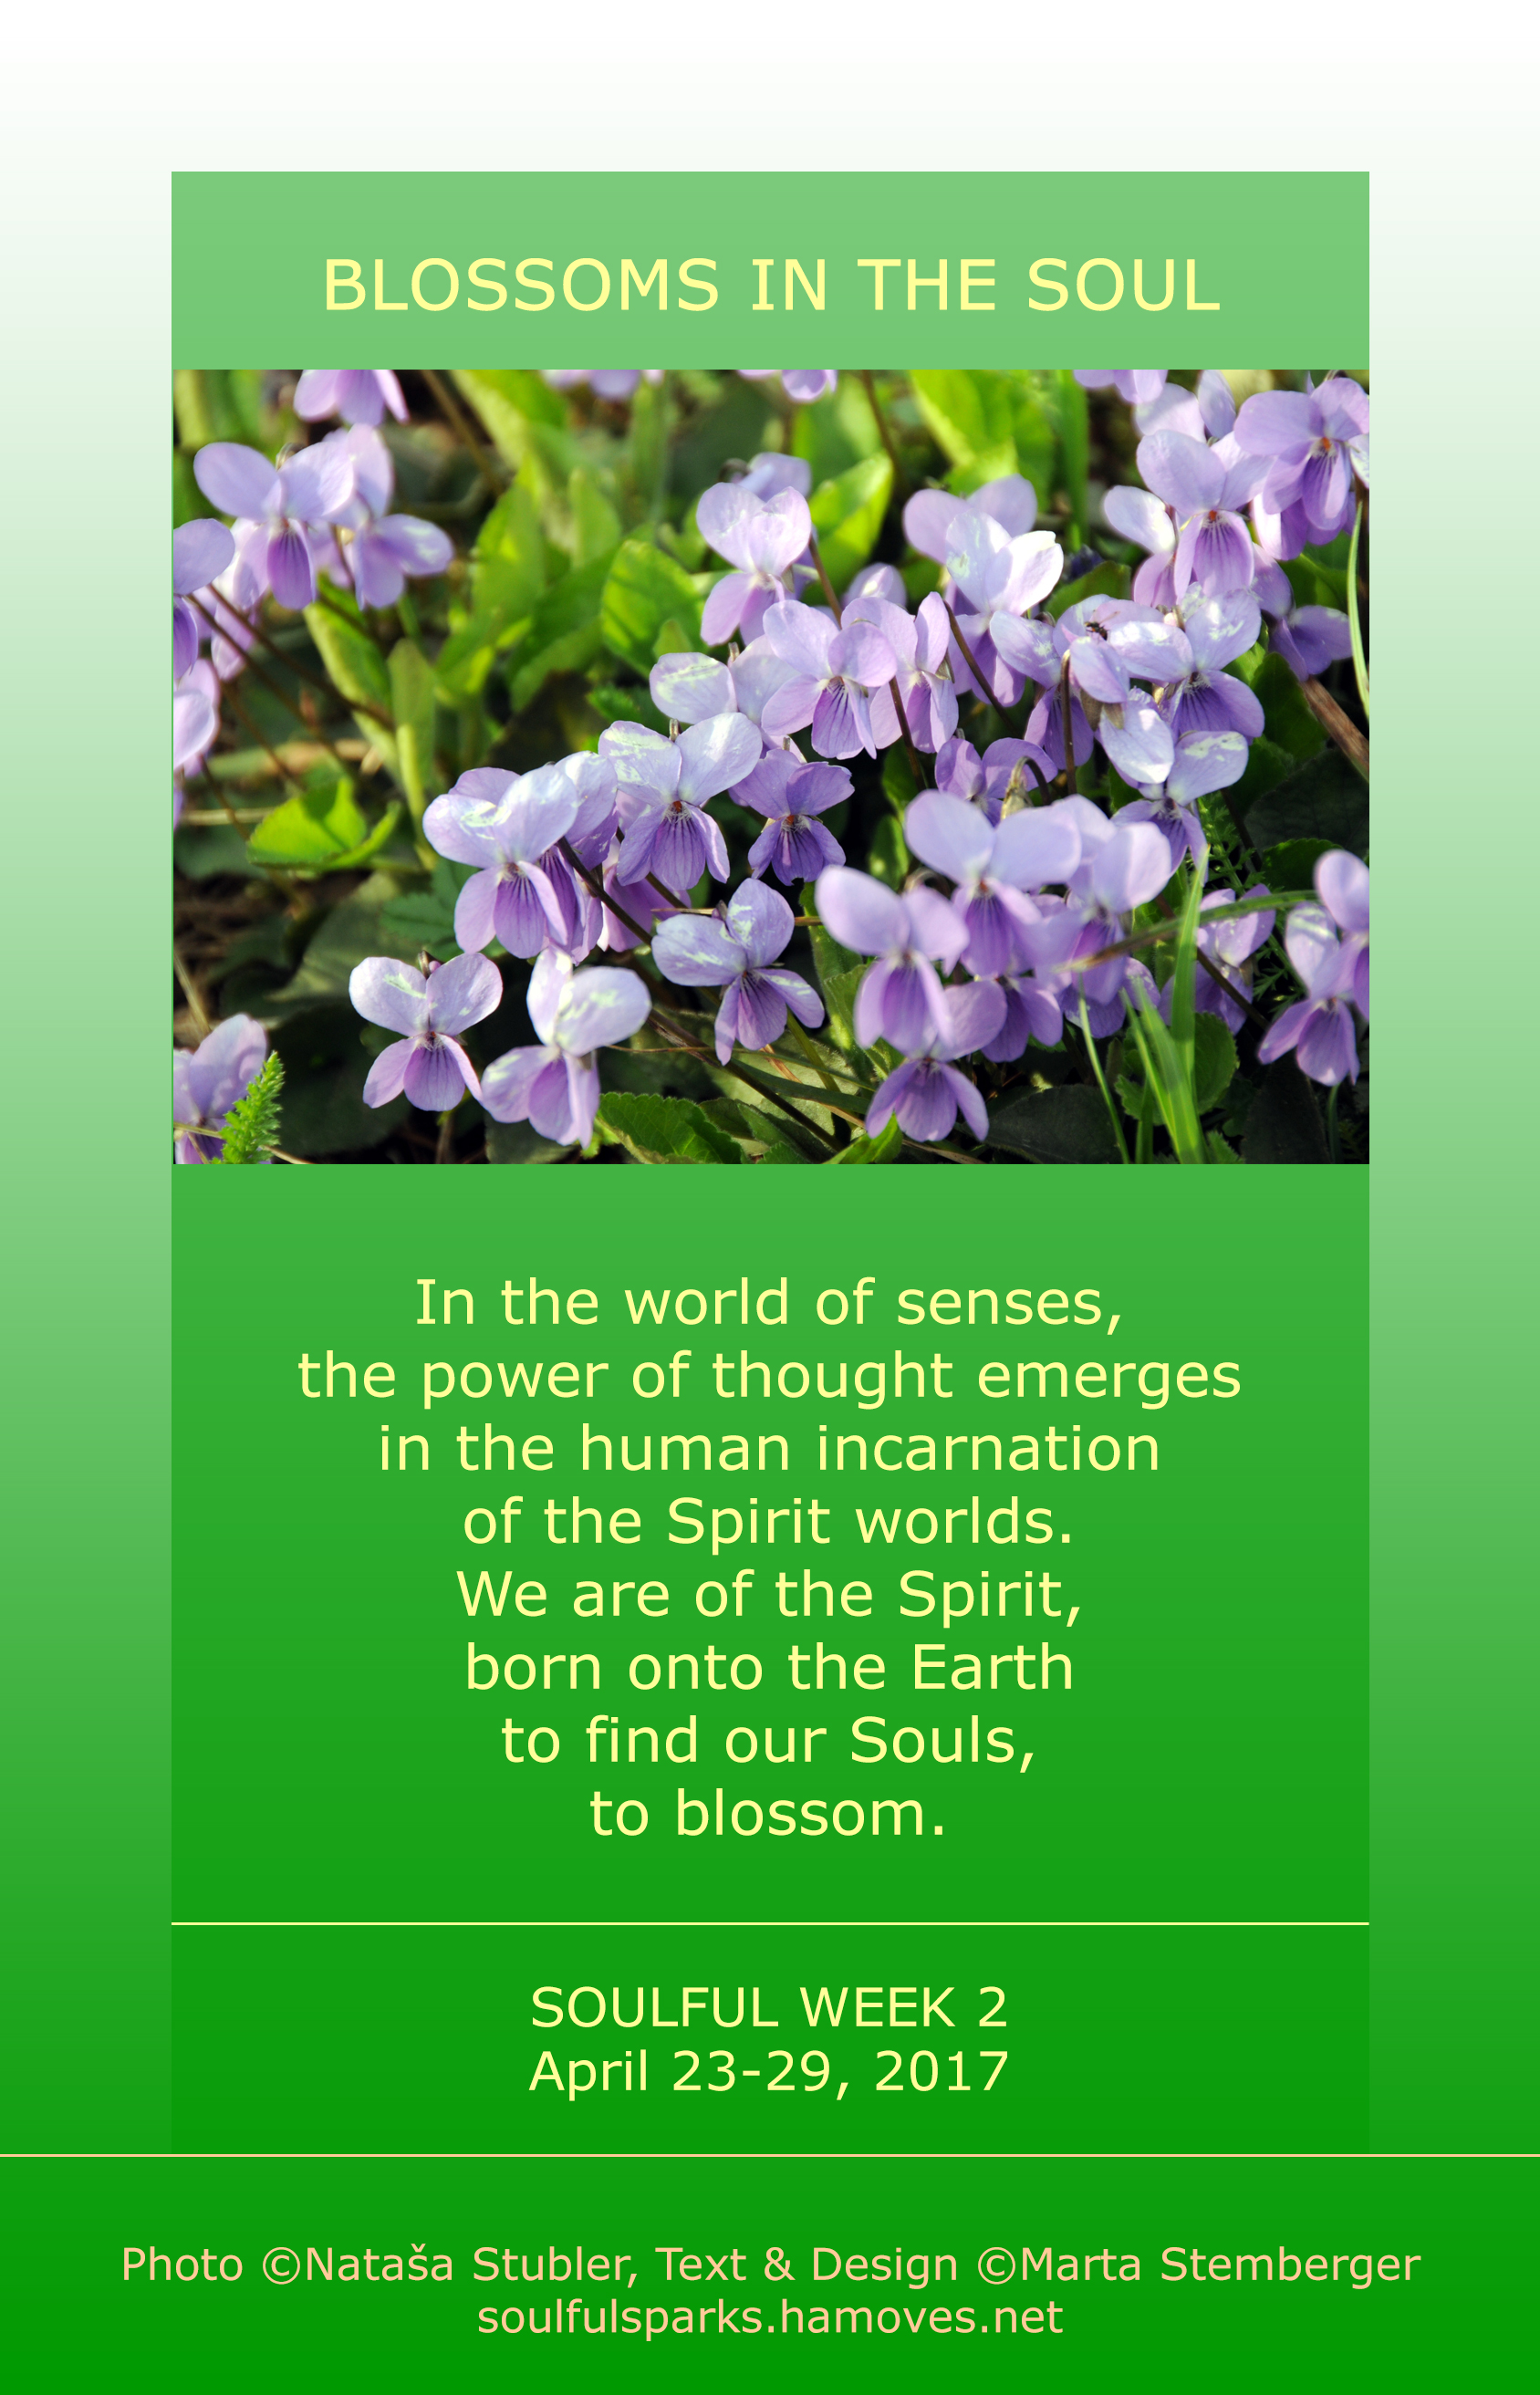 Blossoms in the Soul